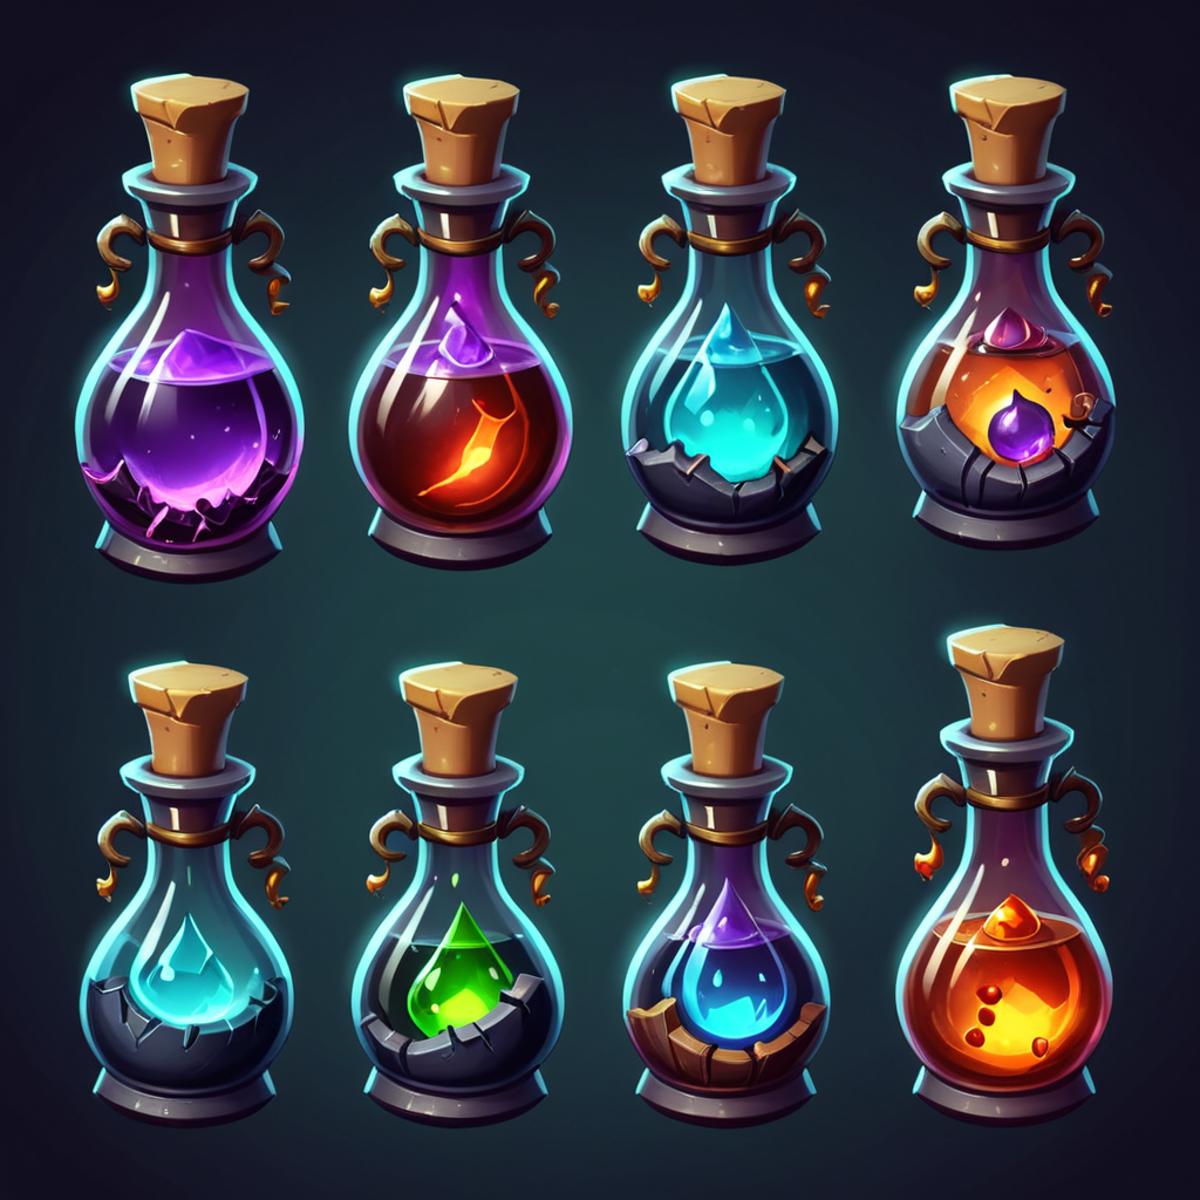 GAG - RPG Potions  |  LoRa XL image by idle